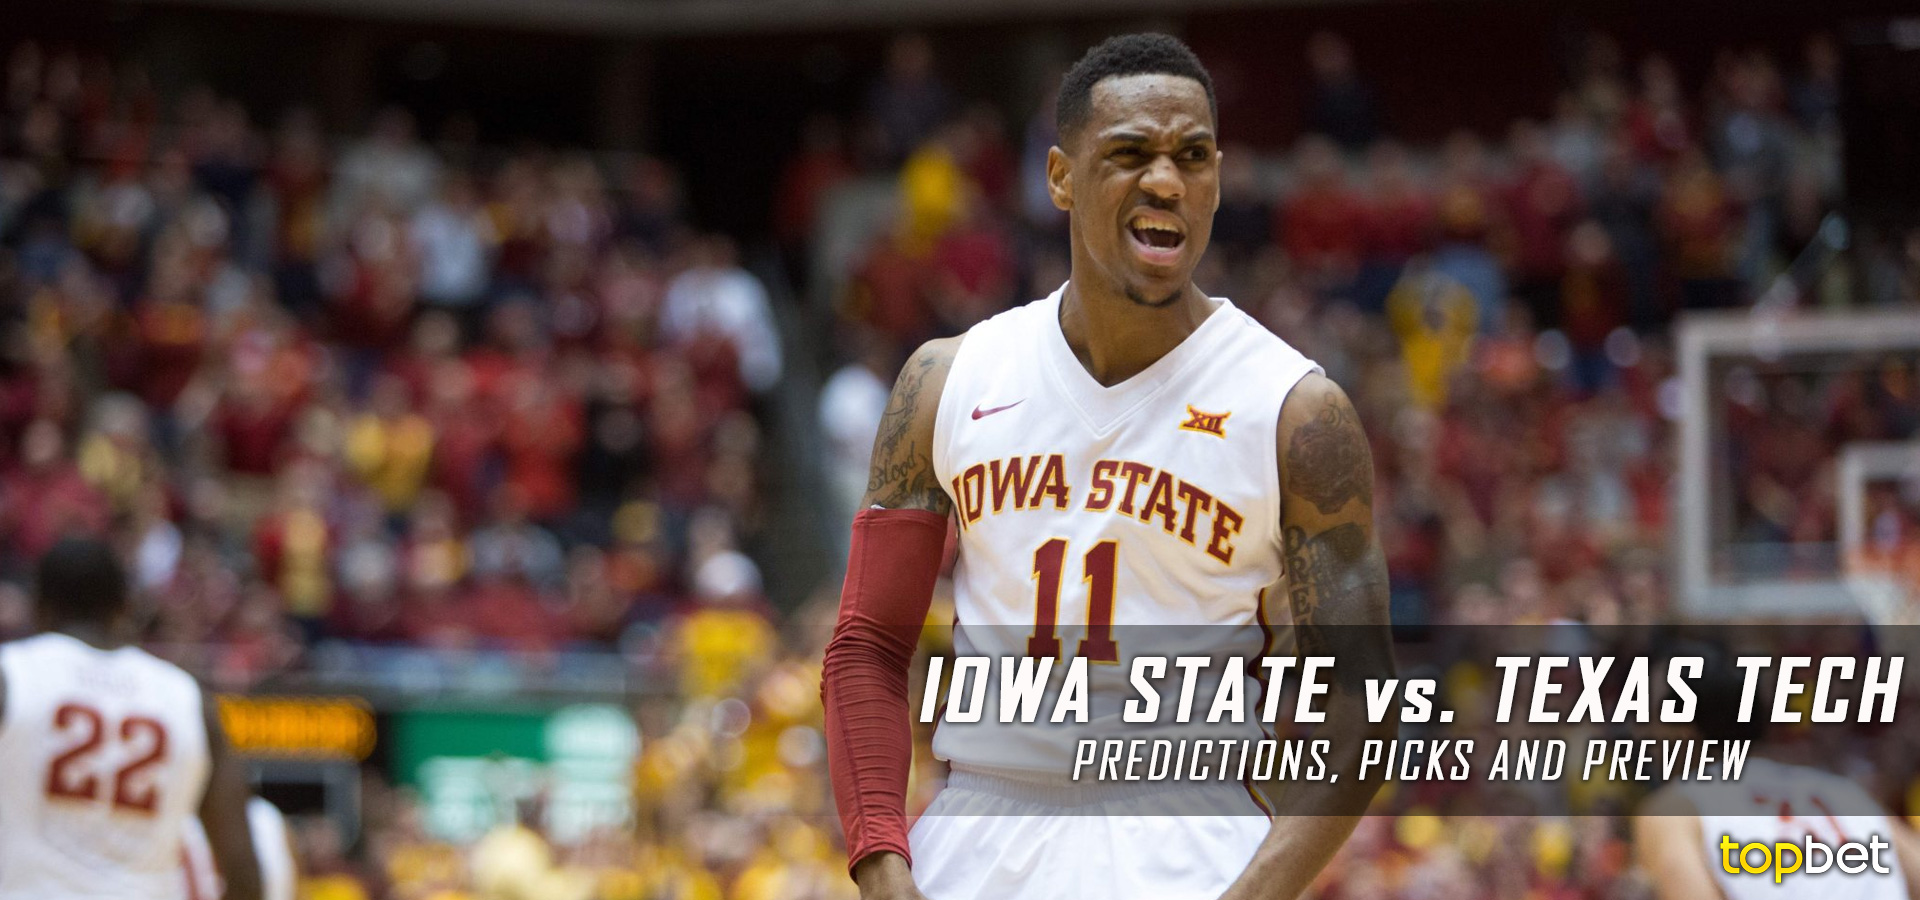 Iowa State Vs Texas Tech Basketball Predictions And Preview 9425